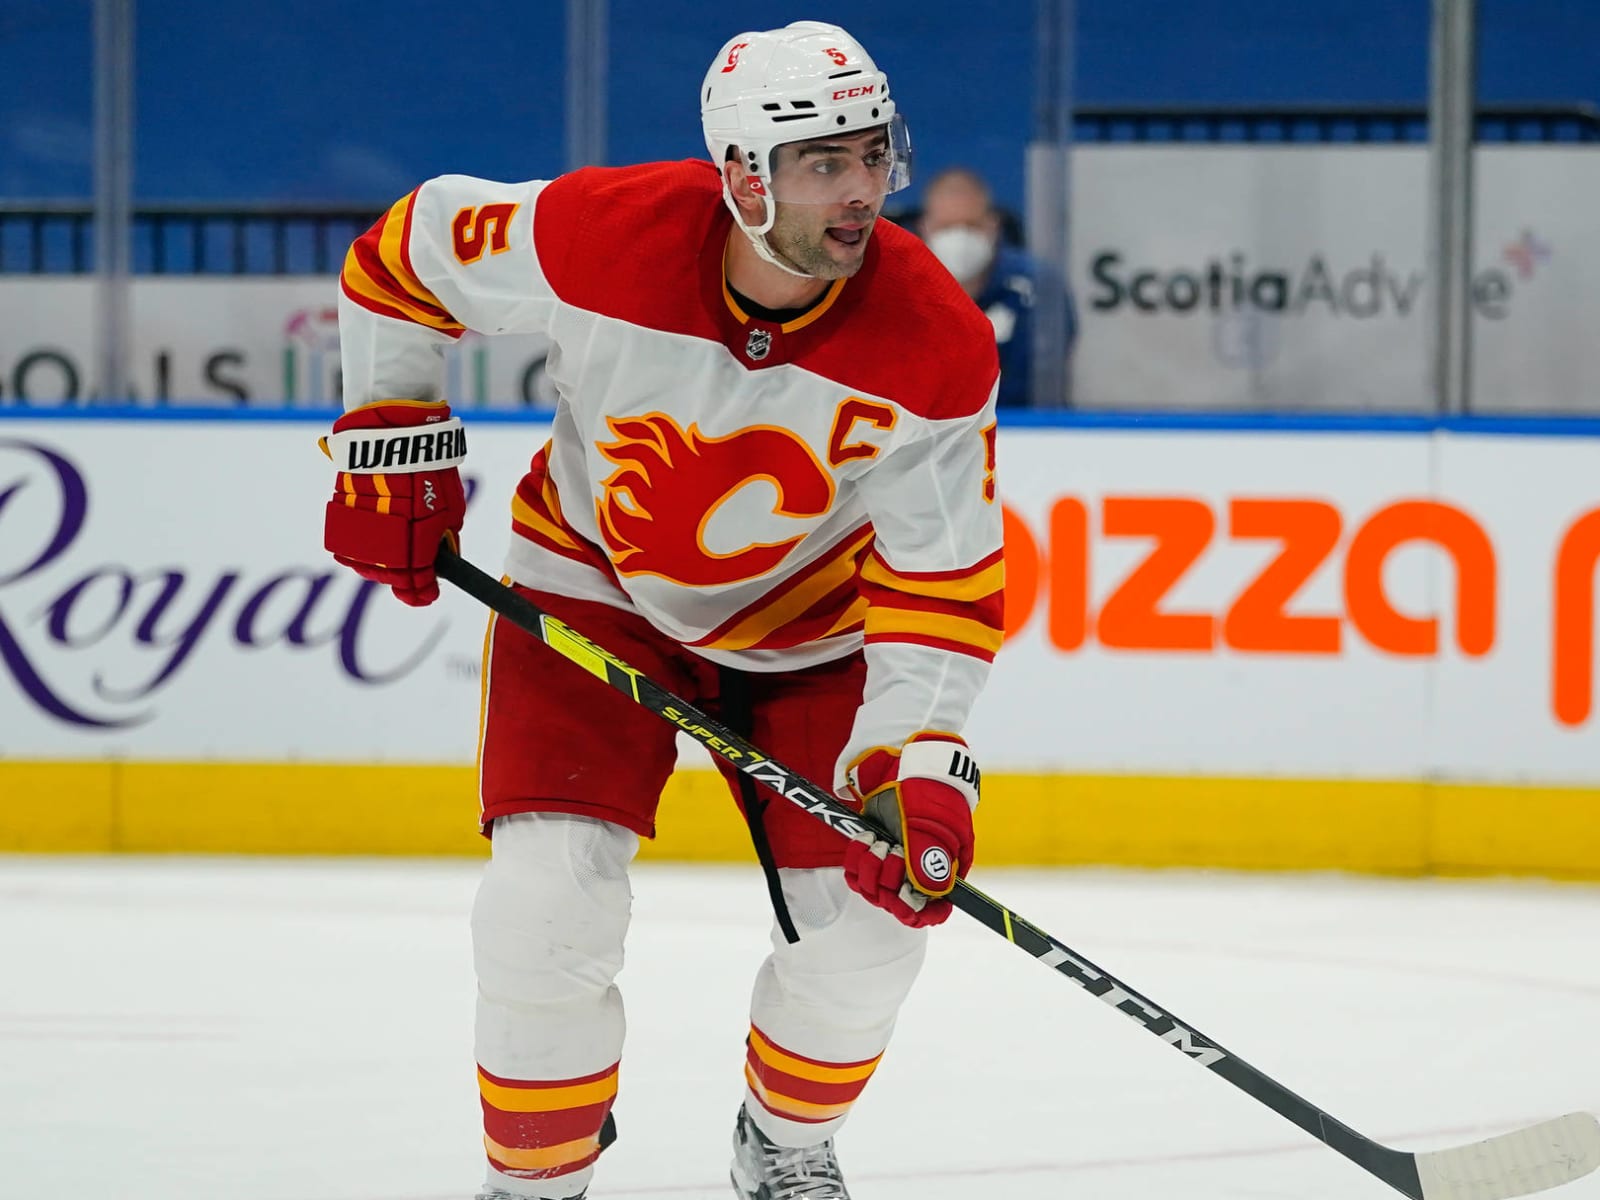 Is Flames' Giordano the NHL's most underrated elite defenceman?